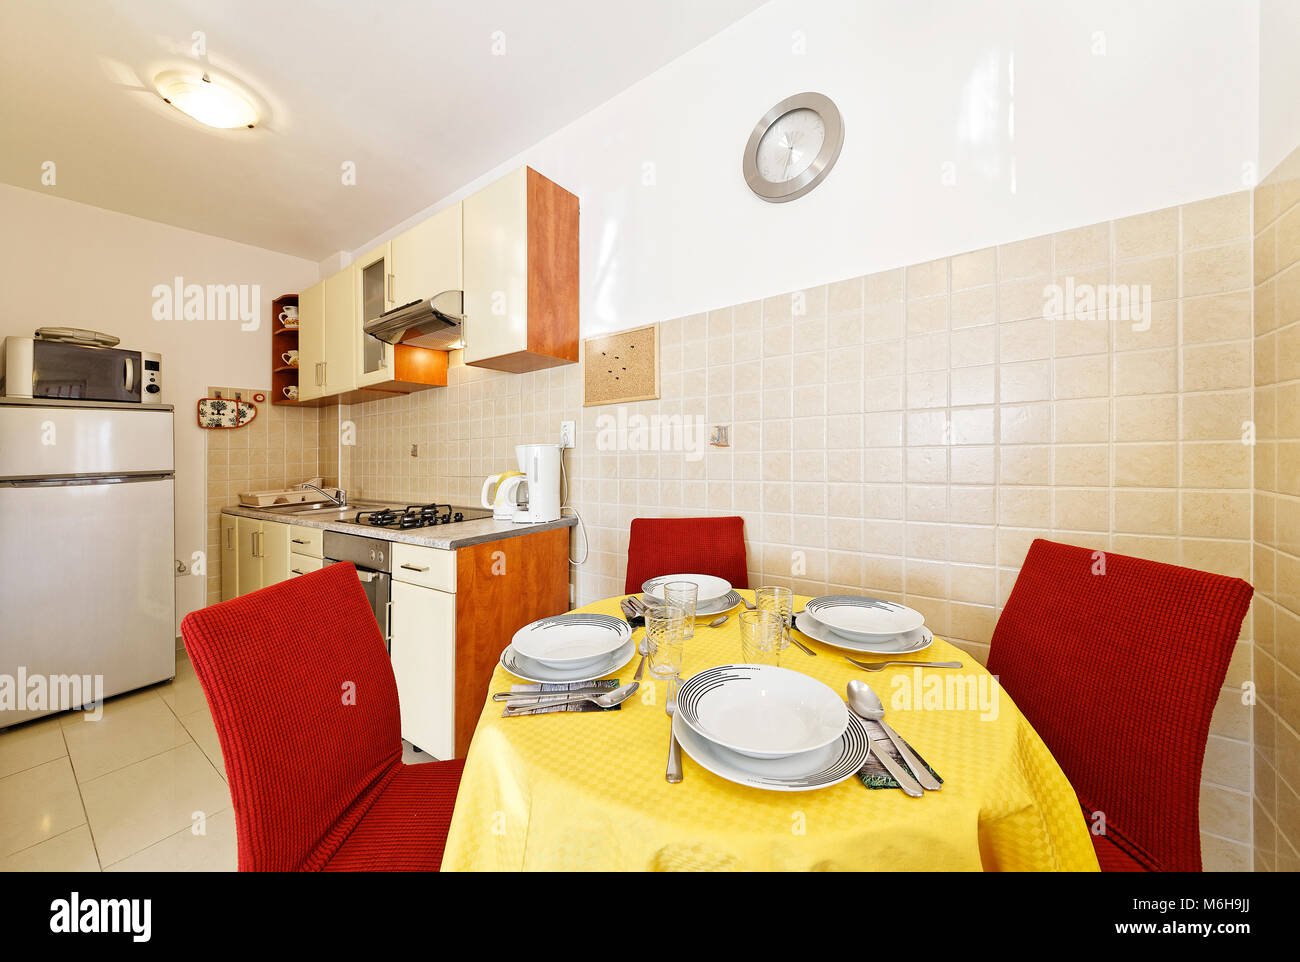 kitchen interior with dining table Stock Photo